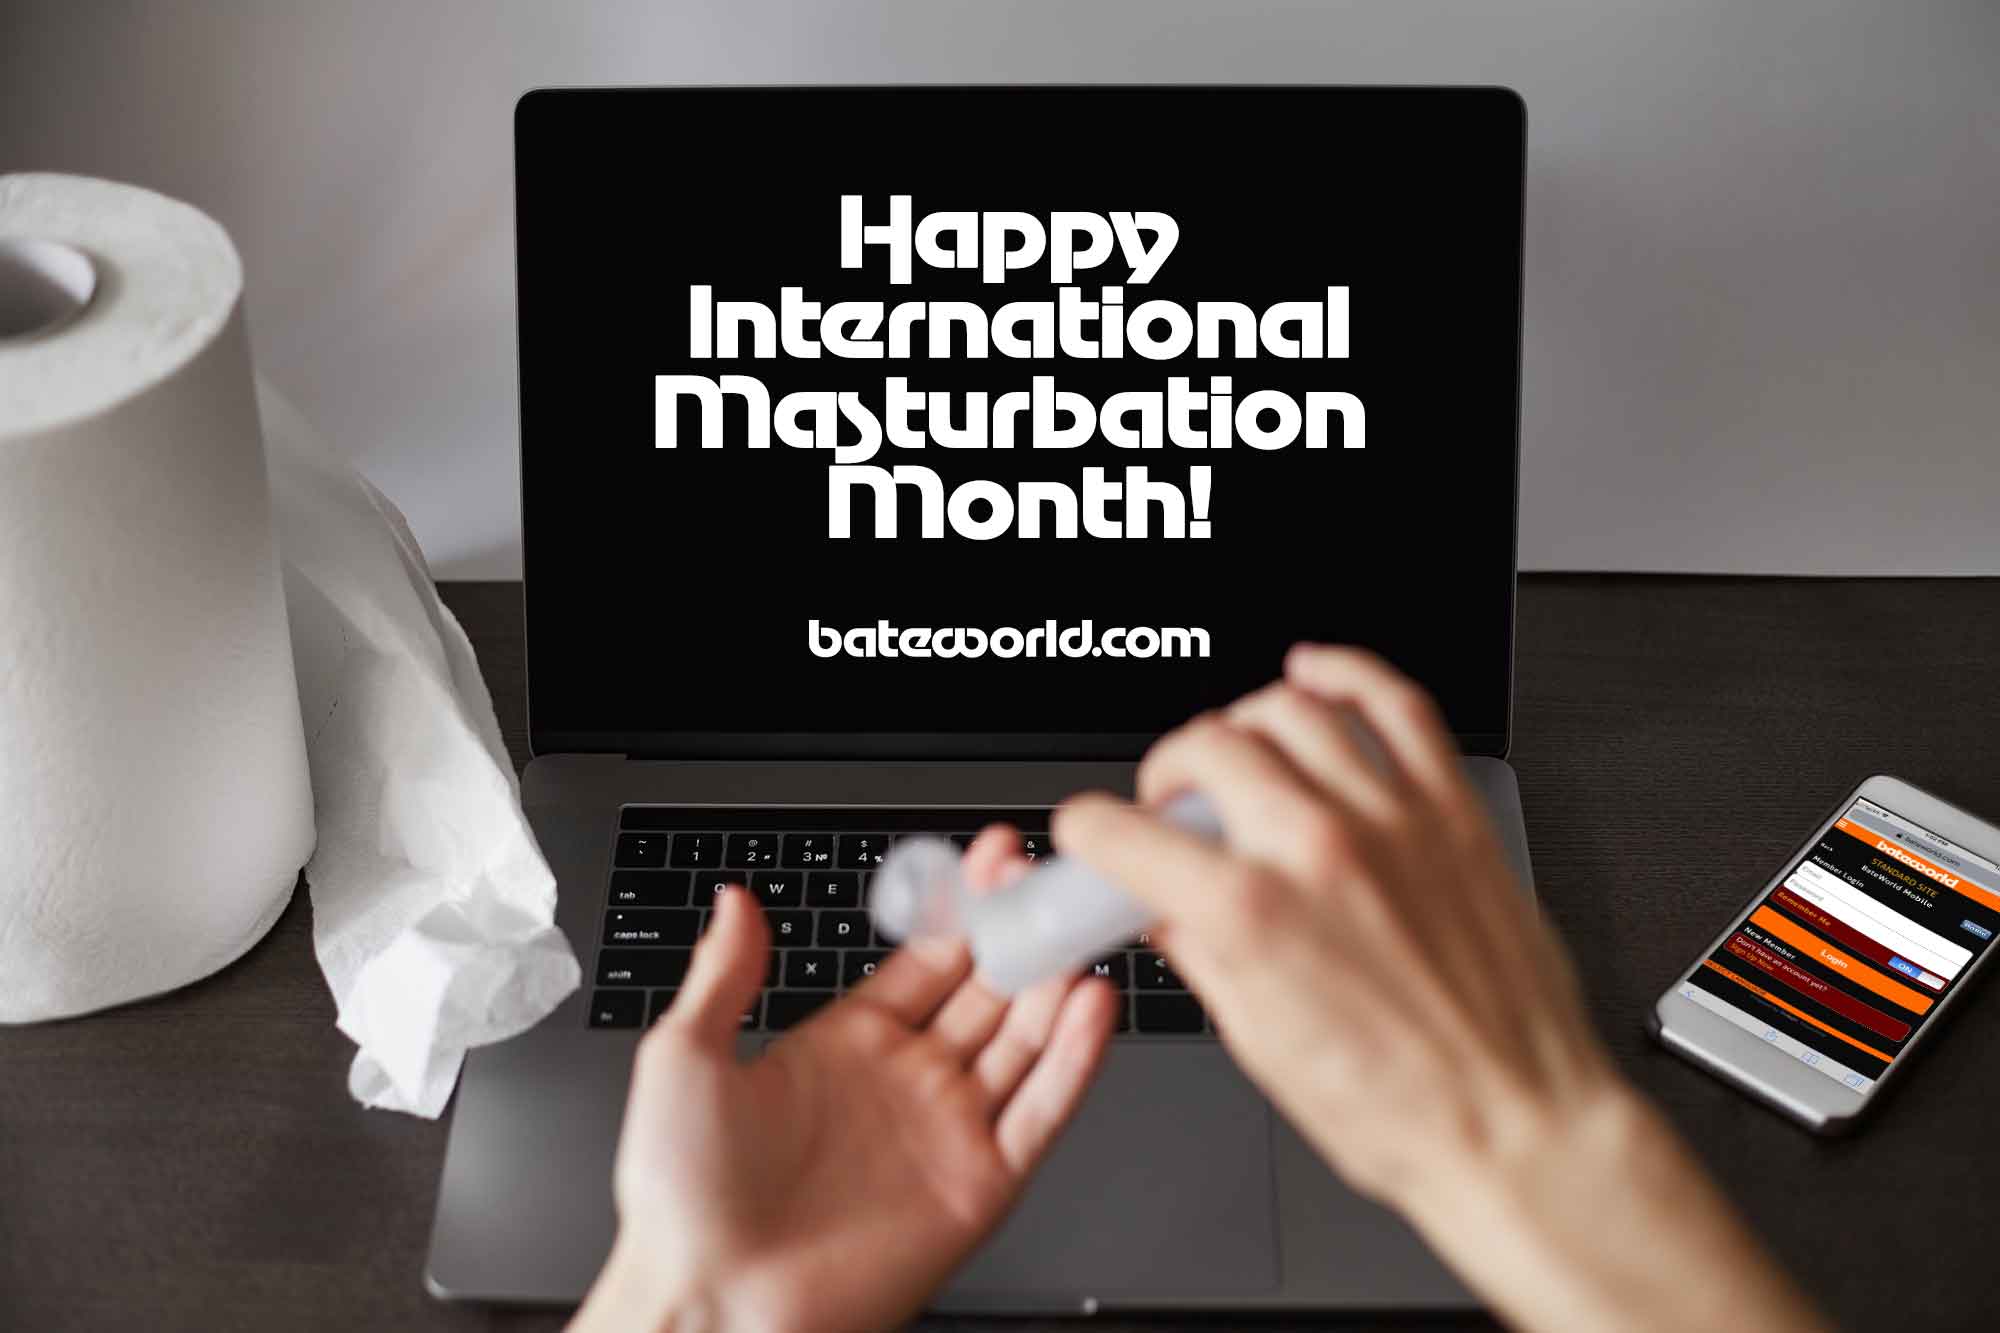 Masturbation Month: It’s All About The Conversation